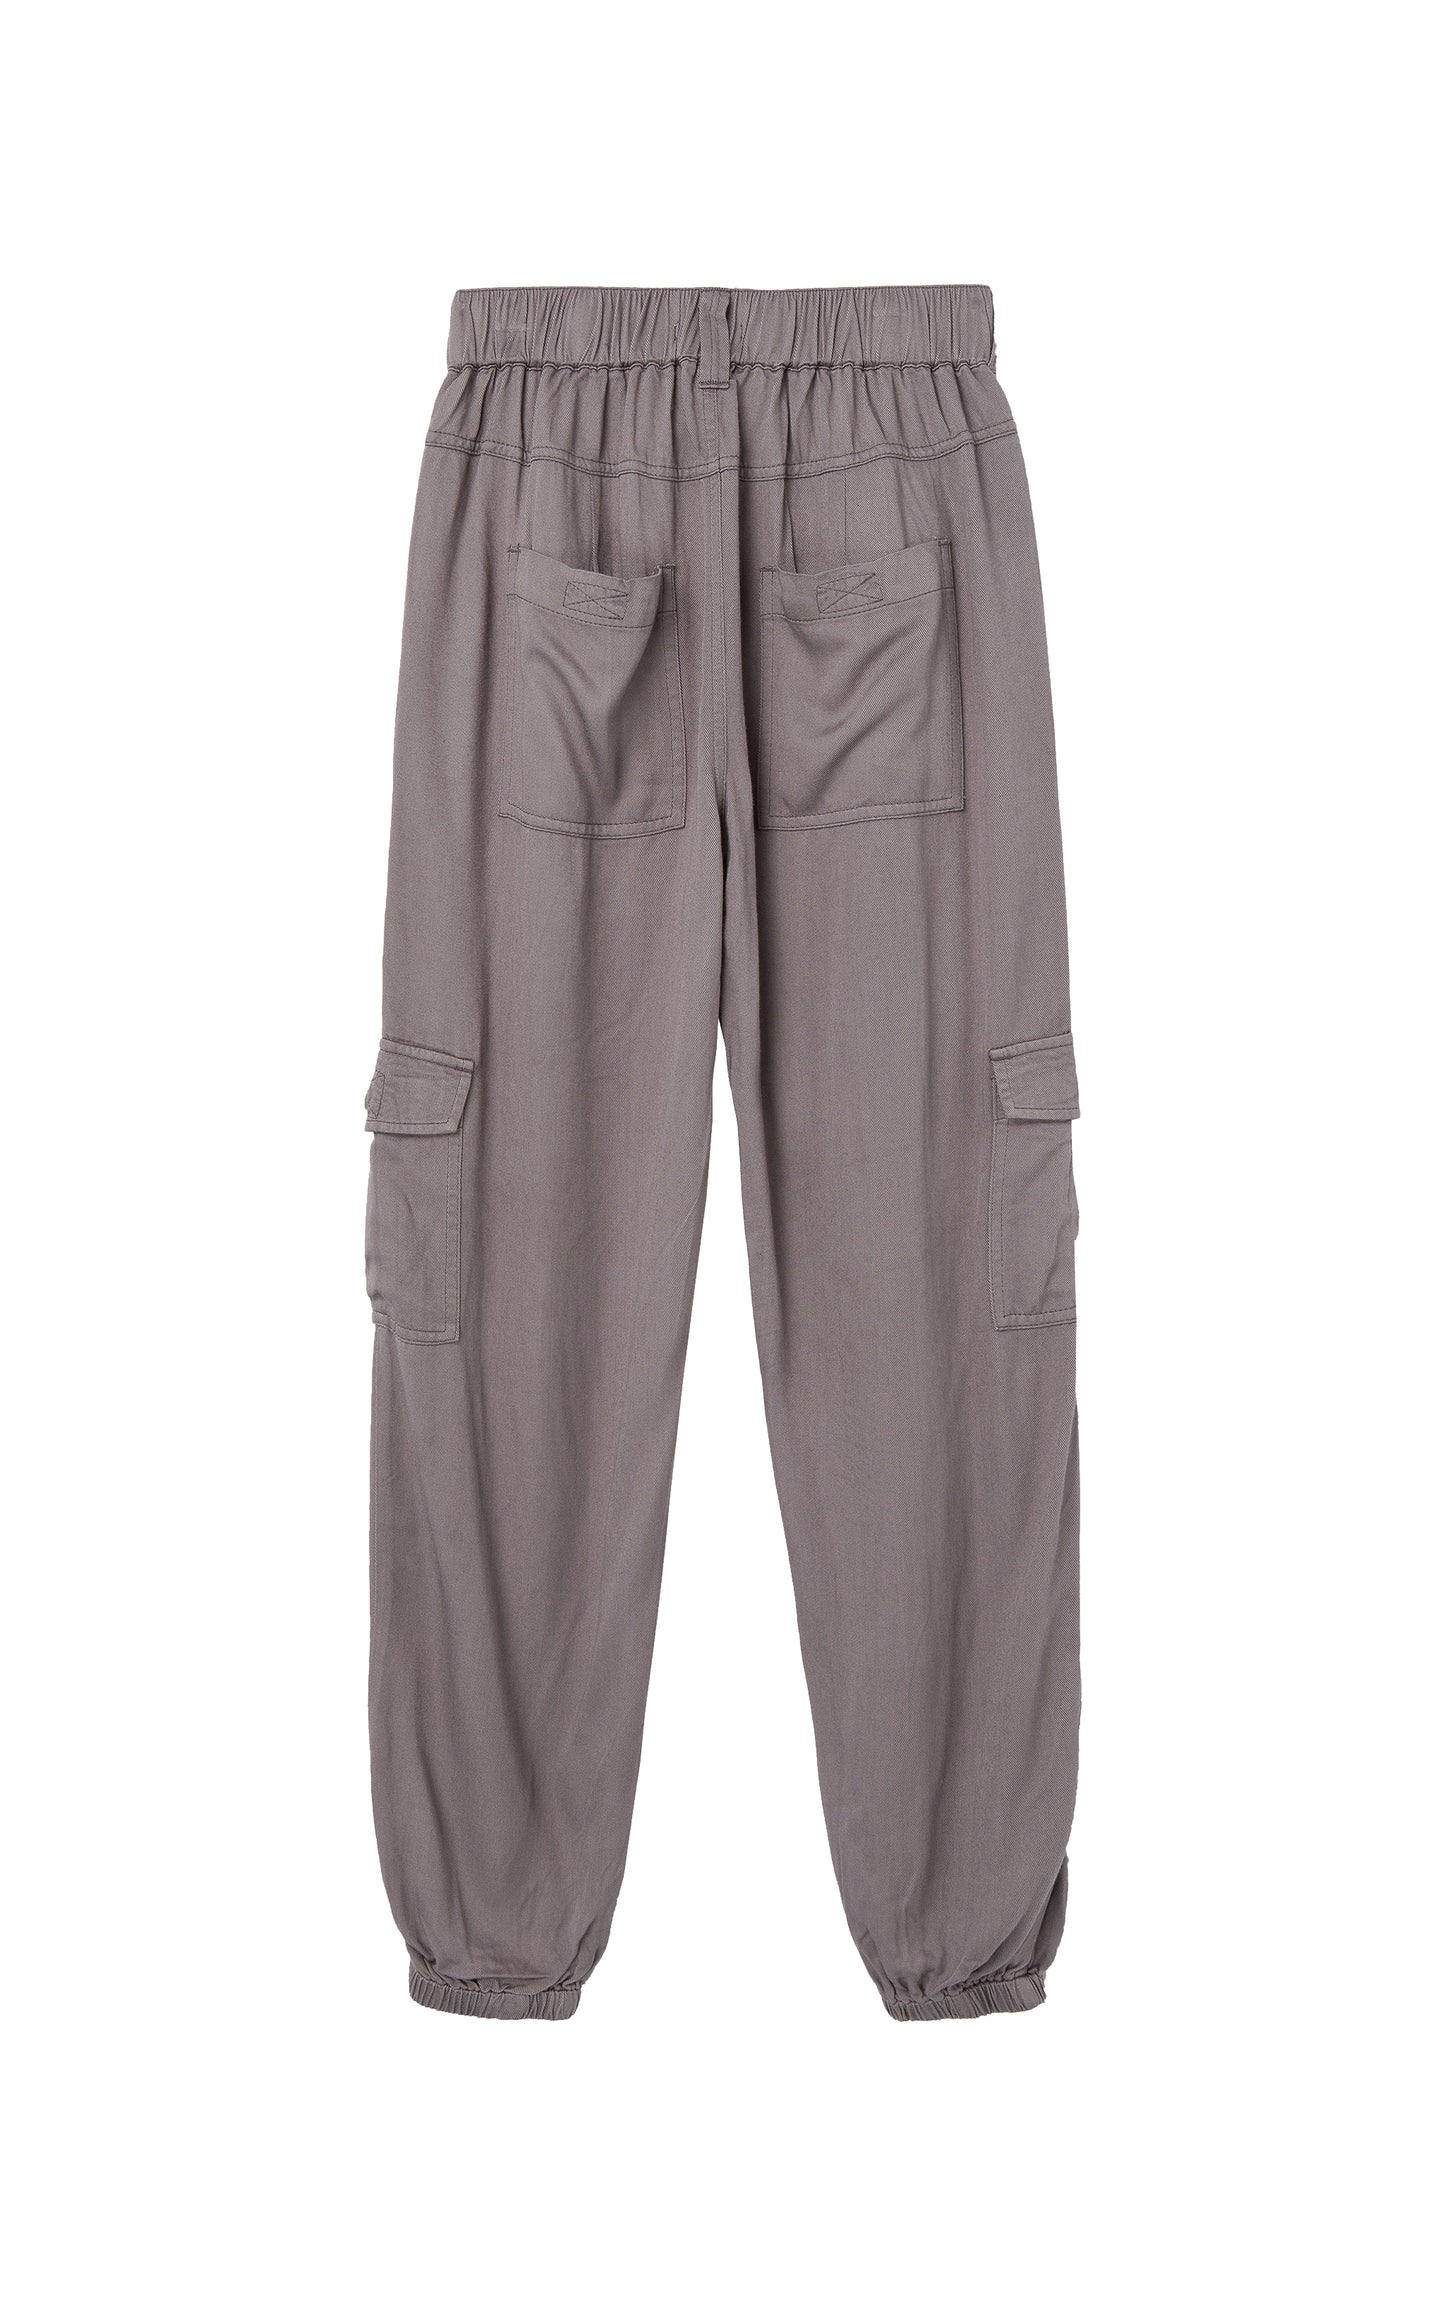 Back view of gray pants with cargo pockets, pleat accents, and elastic ankle cuffs. 